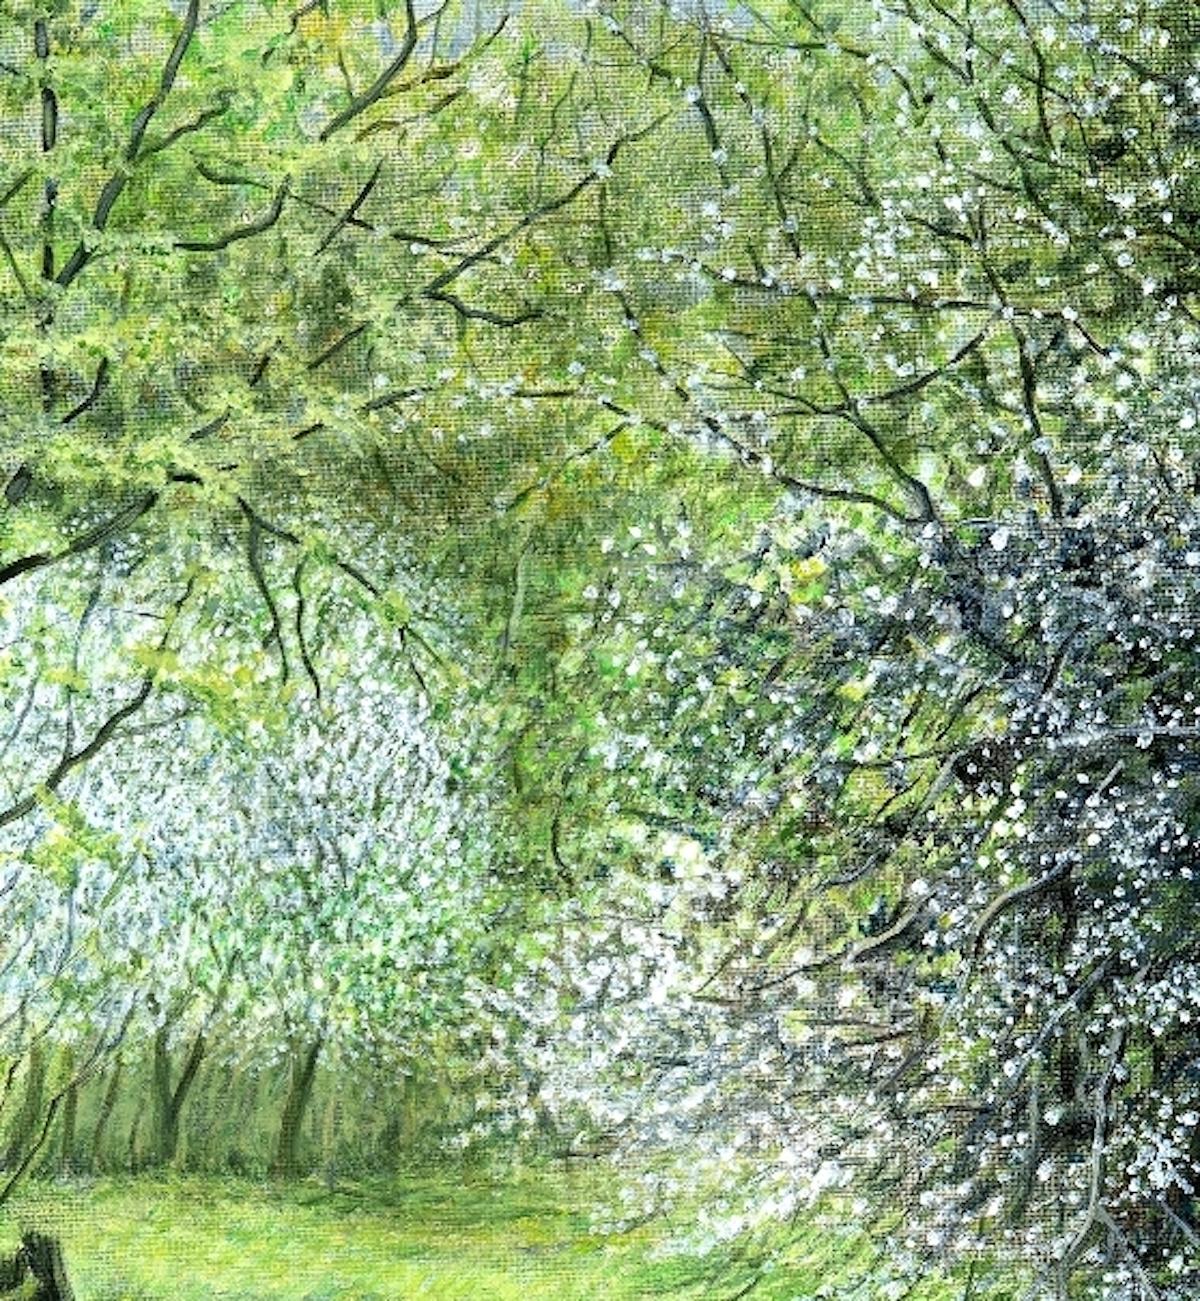 Spring Walk, Realist Style Painting, Traditional Woodland Painting, Floral Art - Green Landscape Painting by Jane Peart